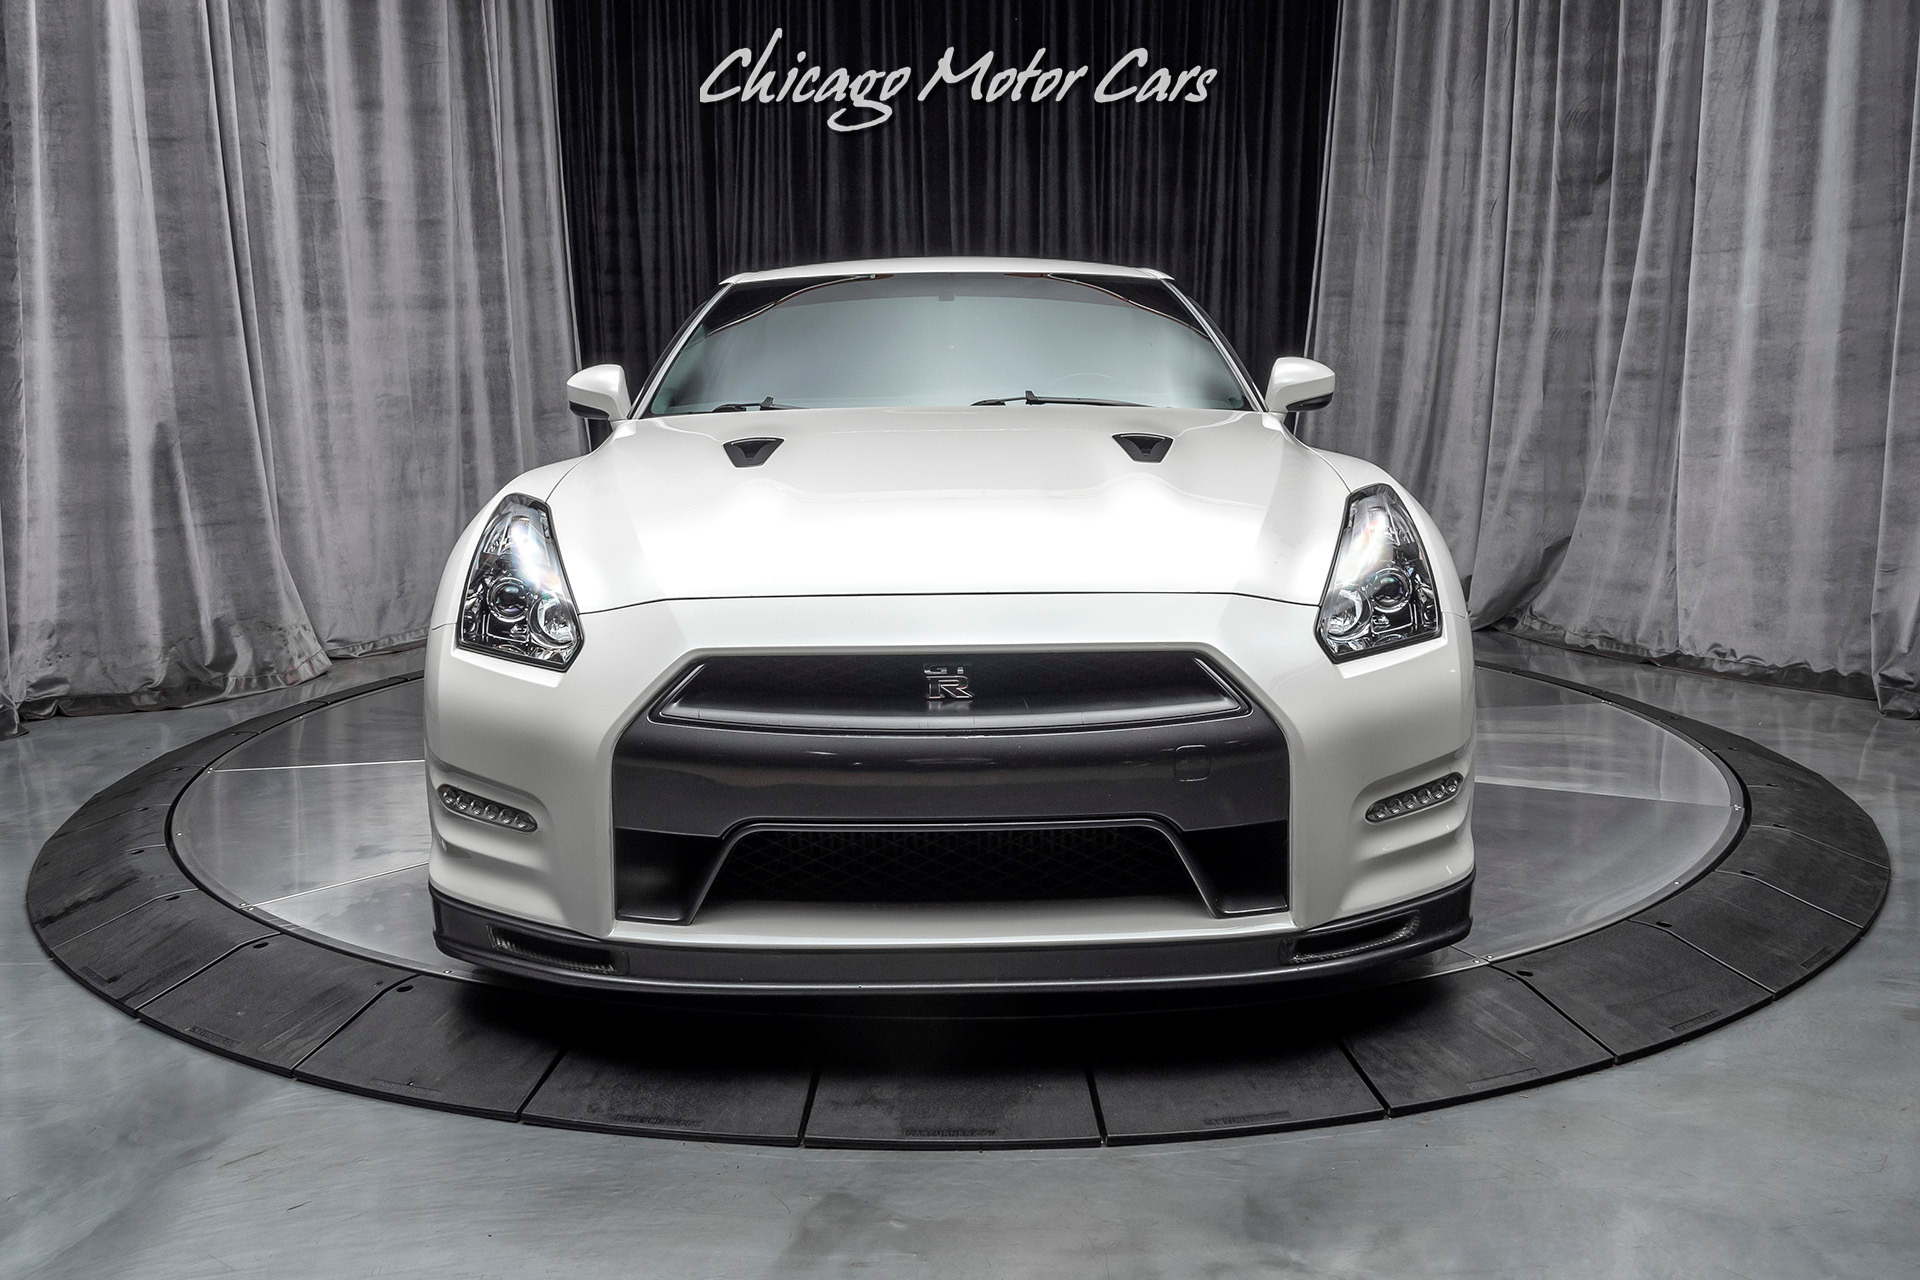 Used-2013-Nissan-GT-R-Premium-850HP-Over-46k-in-Receipts-BUILT